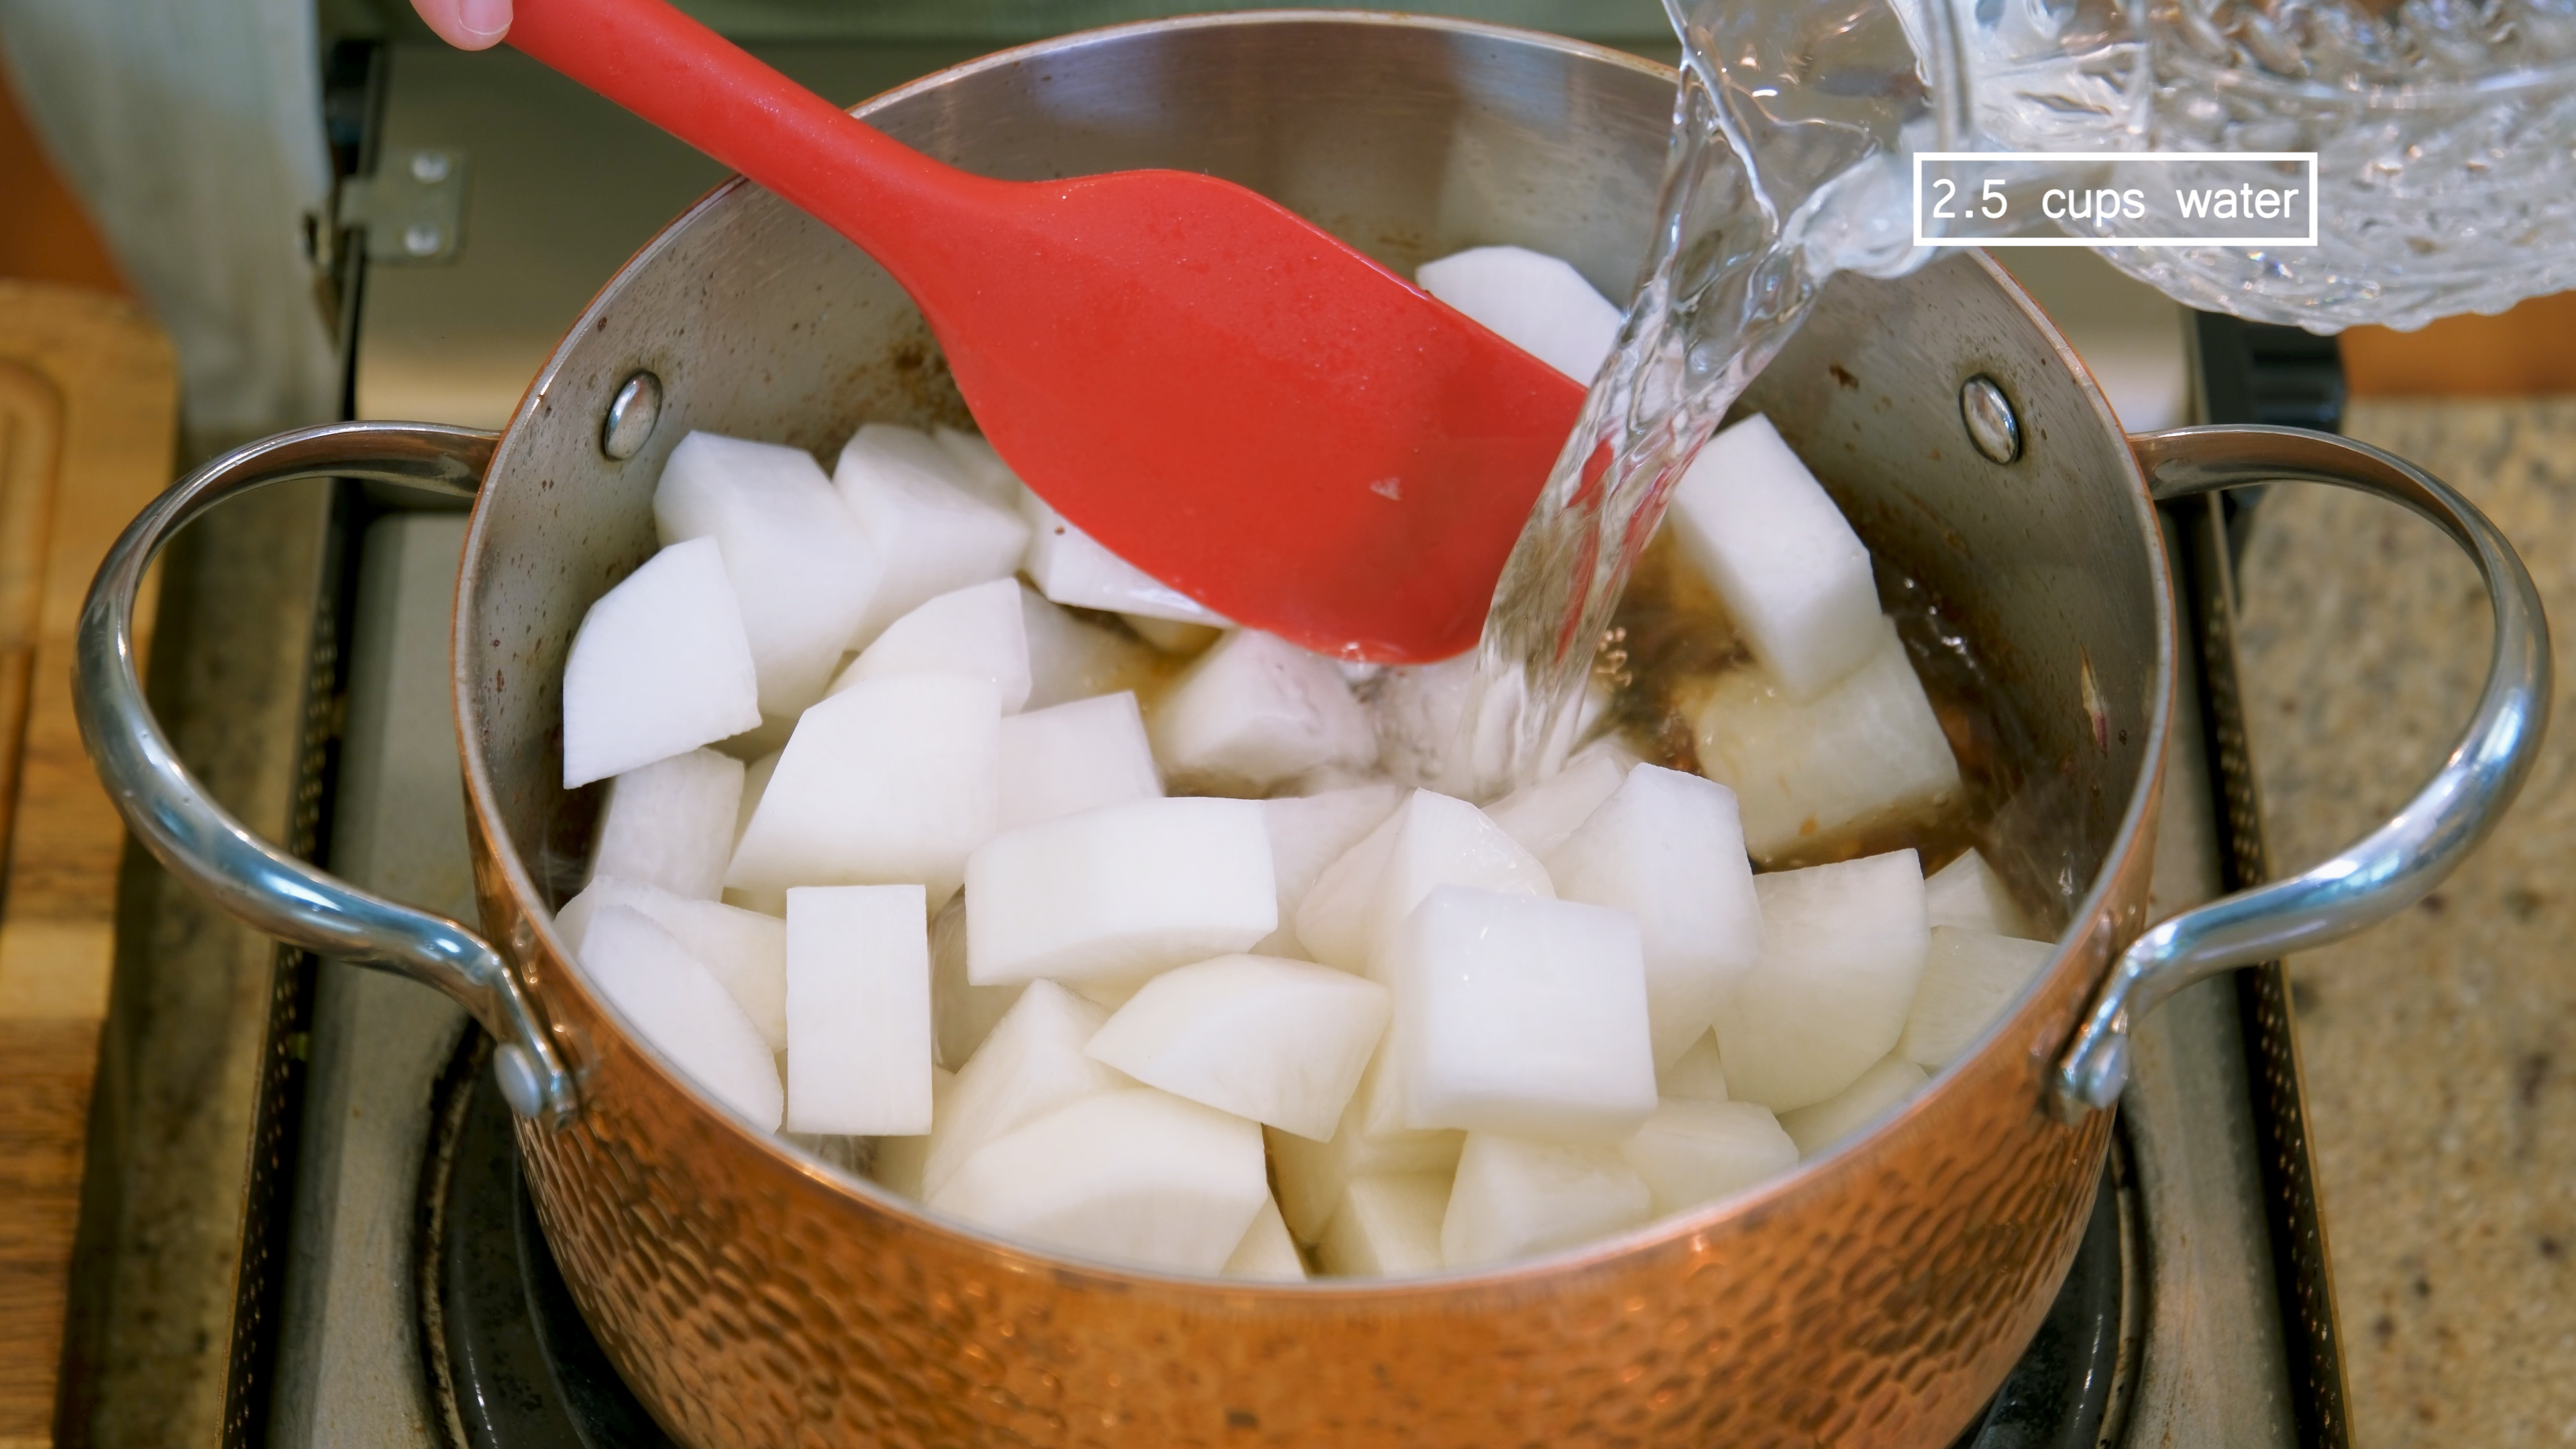 Image of Add the daikon radish and pour in 2.5 cups of...